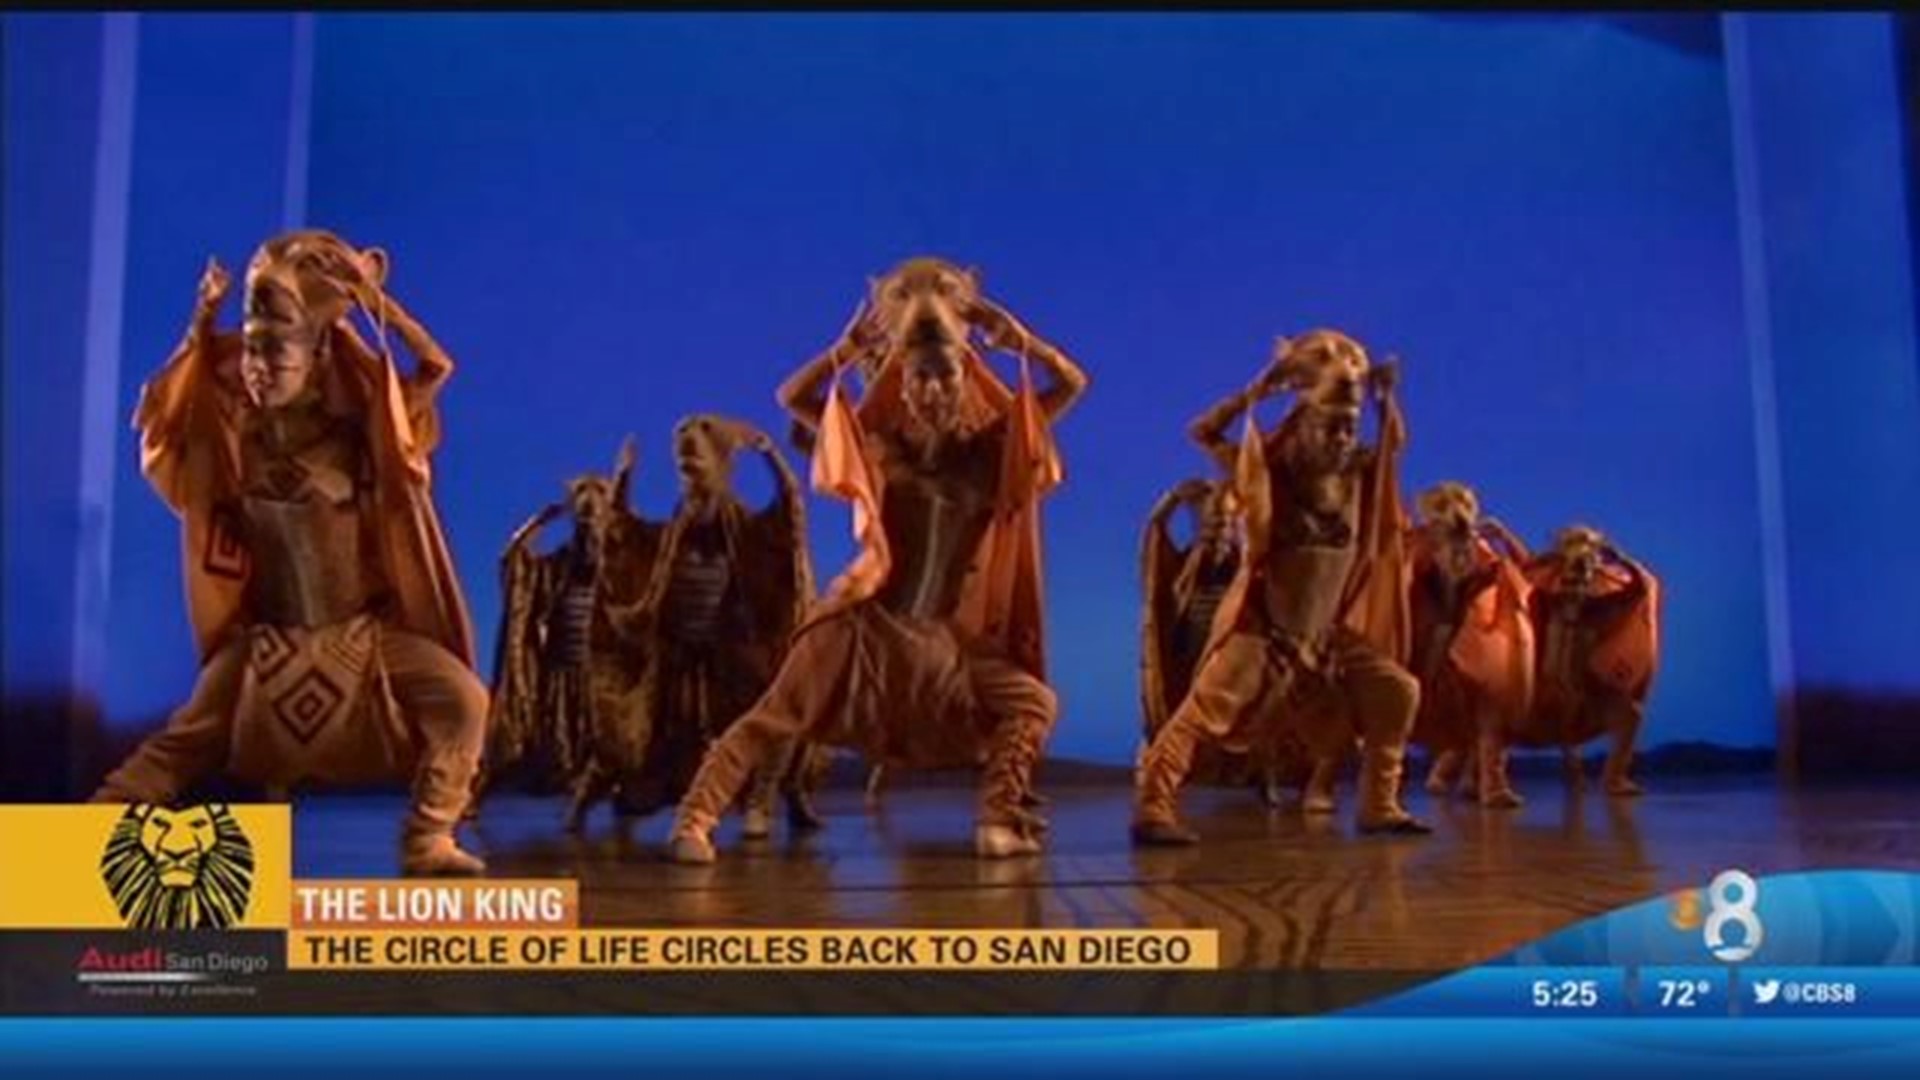 The Lion King: The circle of life returns to San Diego